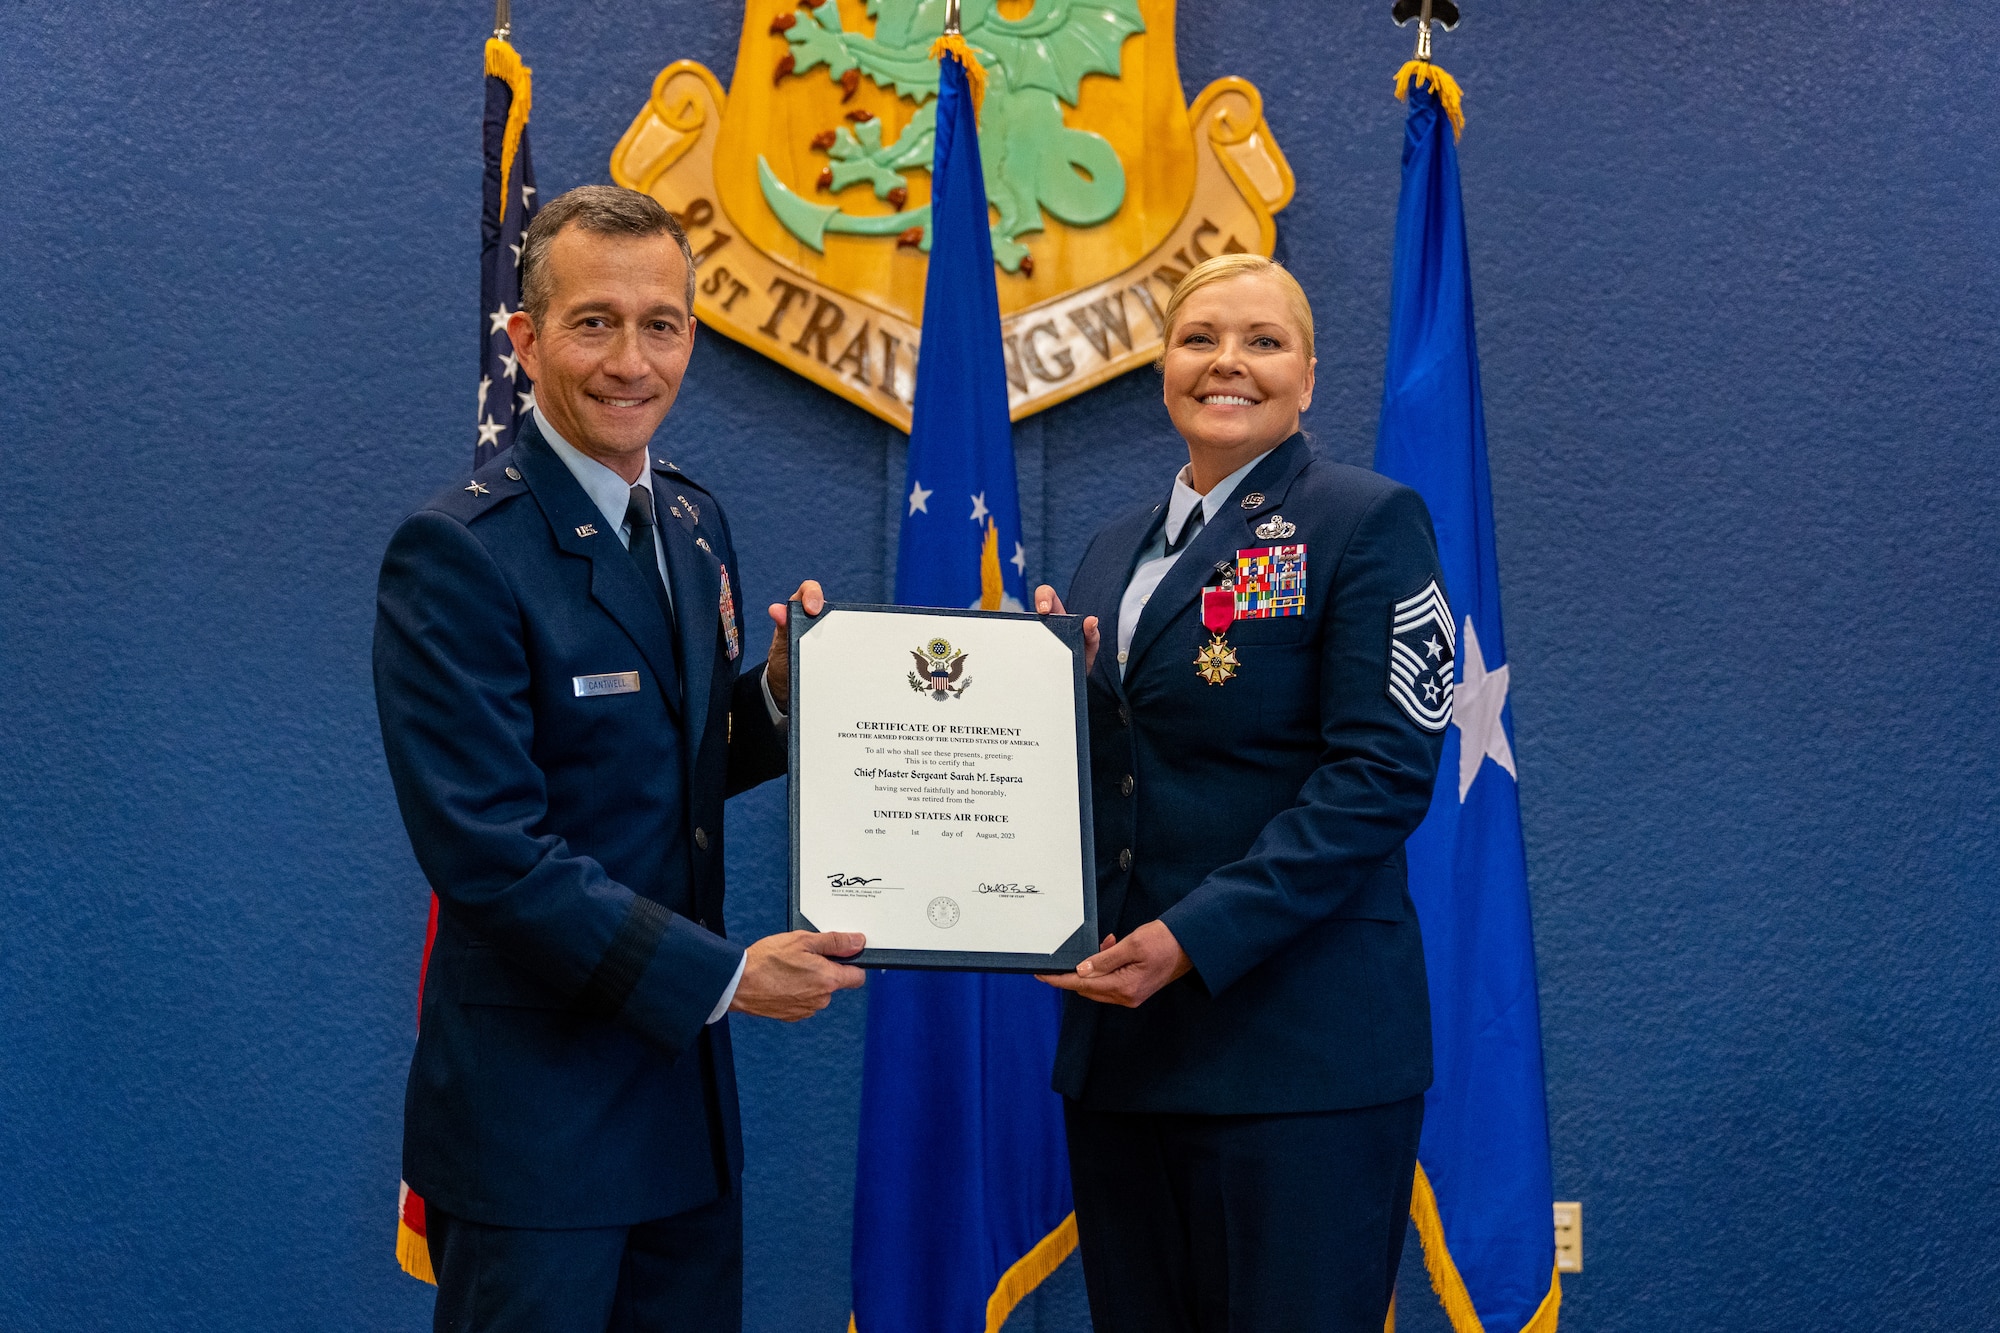 U.S. Air Force Brig. Gen. Houston Cantwell, Jeanne M. Holm Center for Oﬃcer Accessions and Citizen Development commander, and Chief Master Sgt. Sarah Esparza, 81st Training Wing command chief master sergeant, pose with her Certificate of Retirement during her retirement ceremony at Keesler Air Force Base, Mississippi, June 1, 2023.